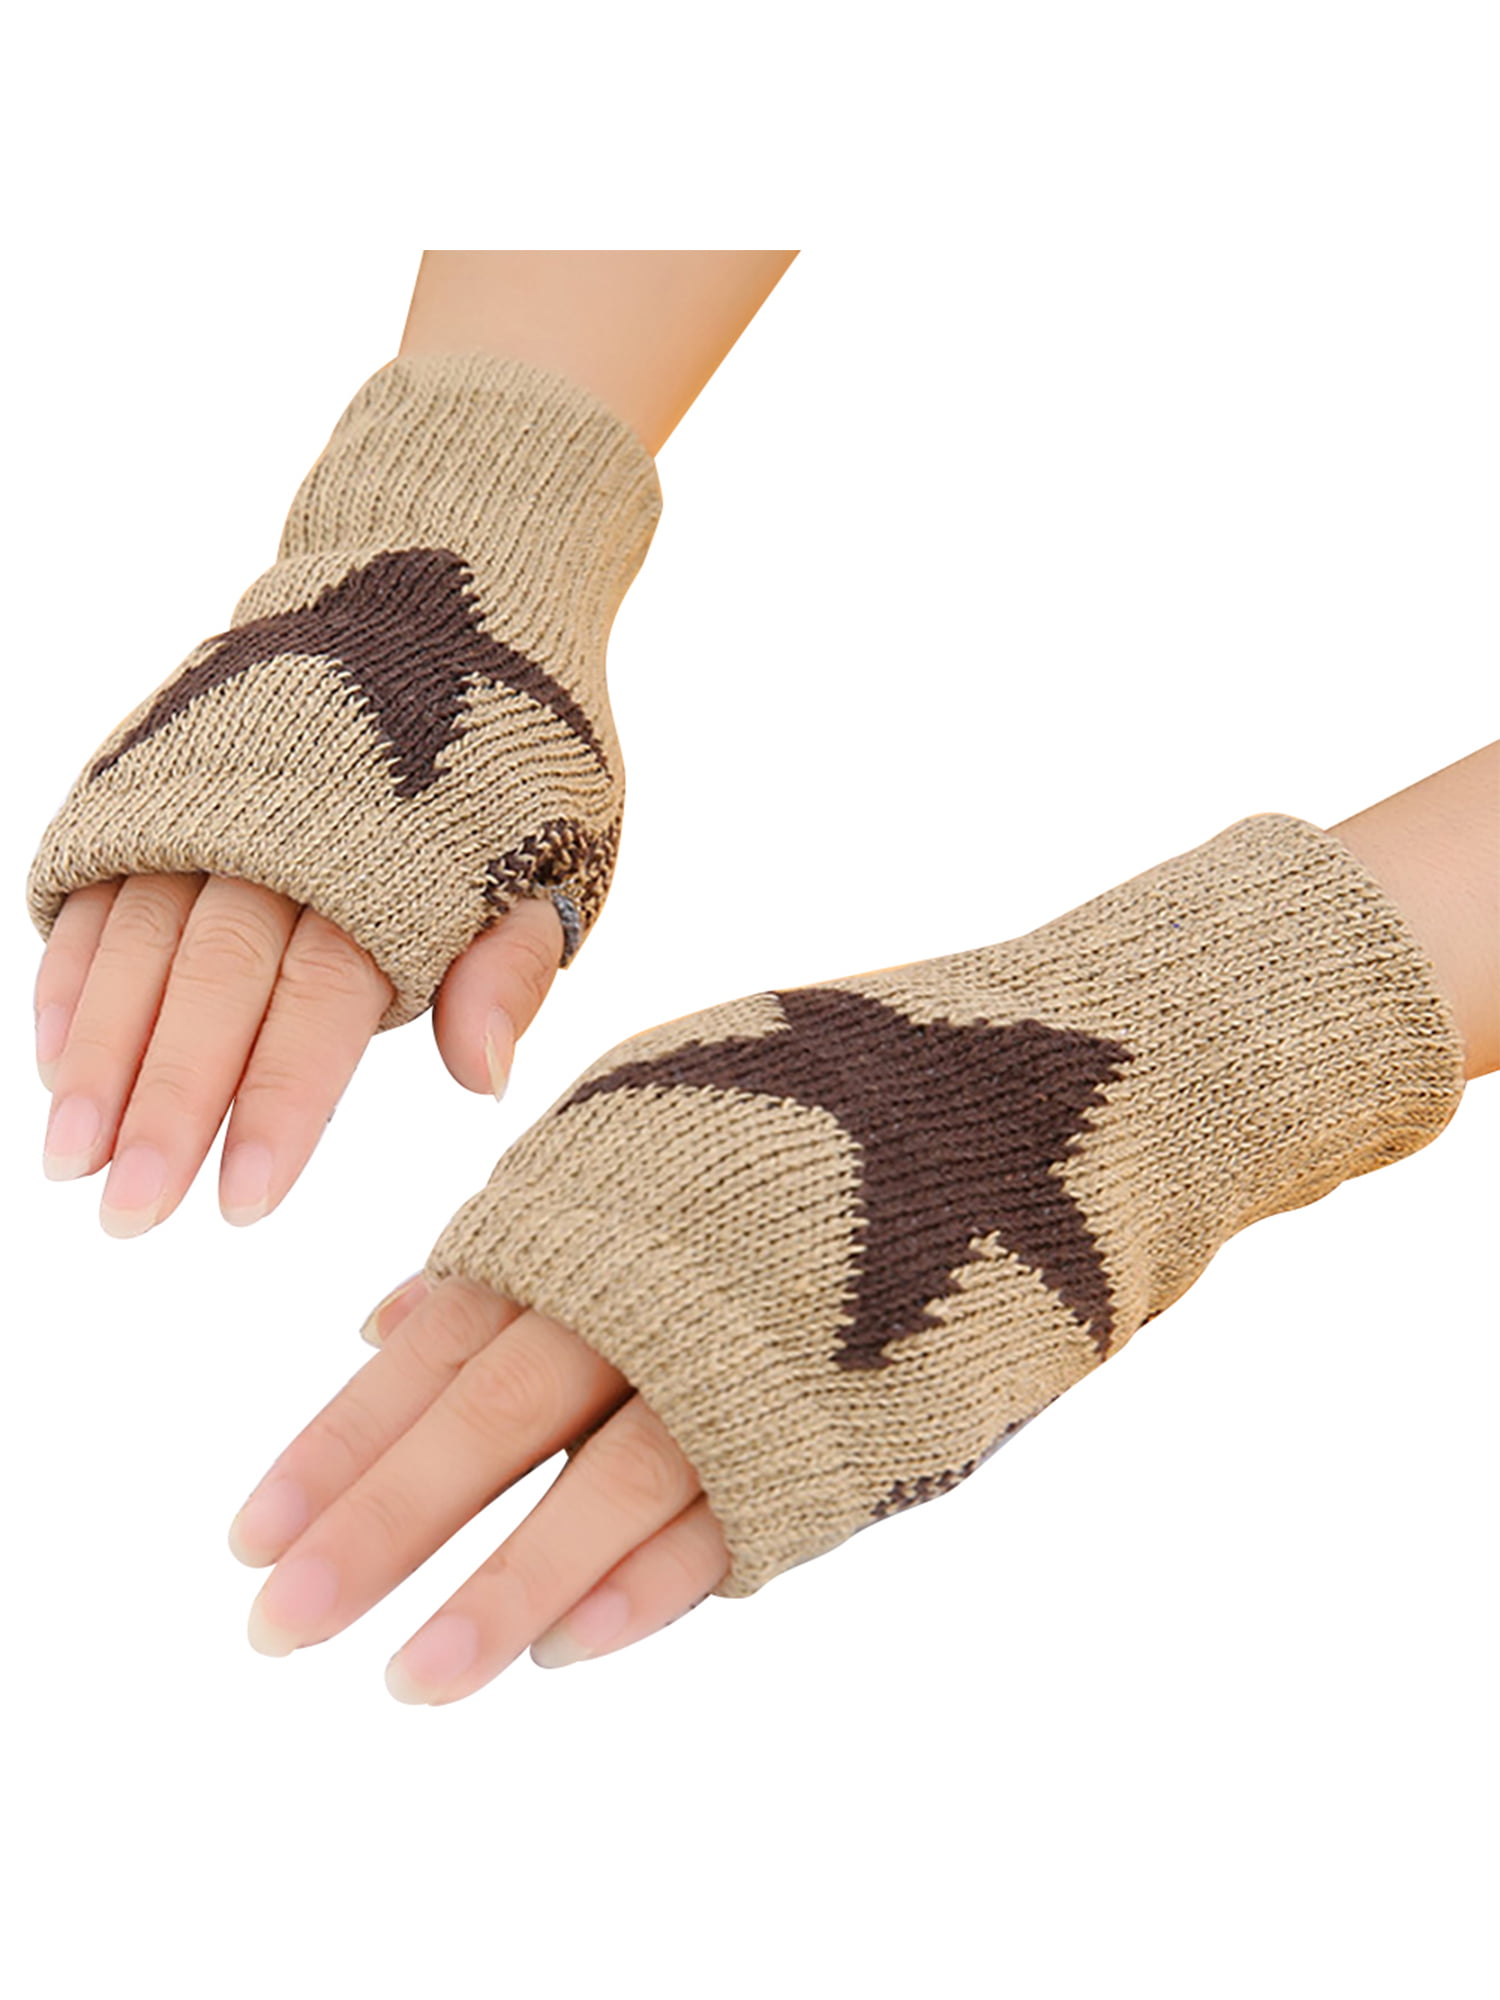 Fashion Warm Cotton Gloves For Women's Hand Wrist Mitten Knitted Finger Less New